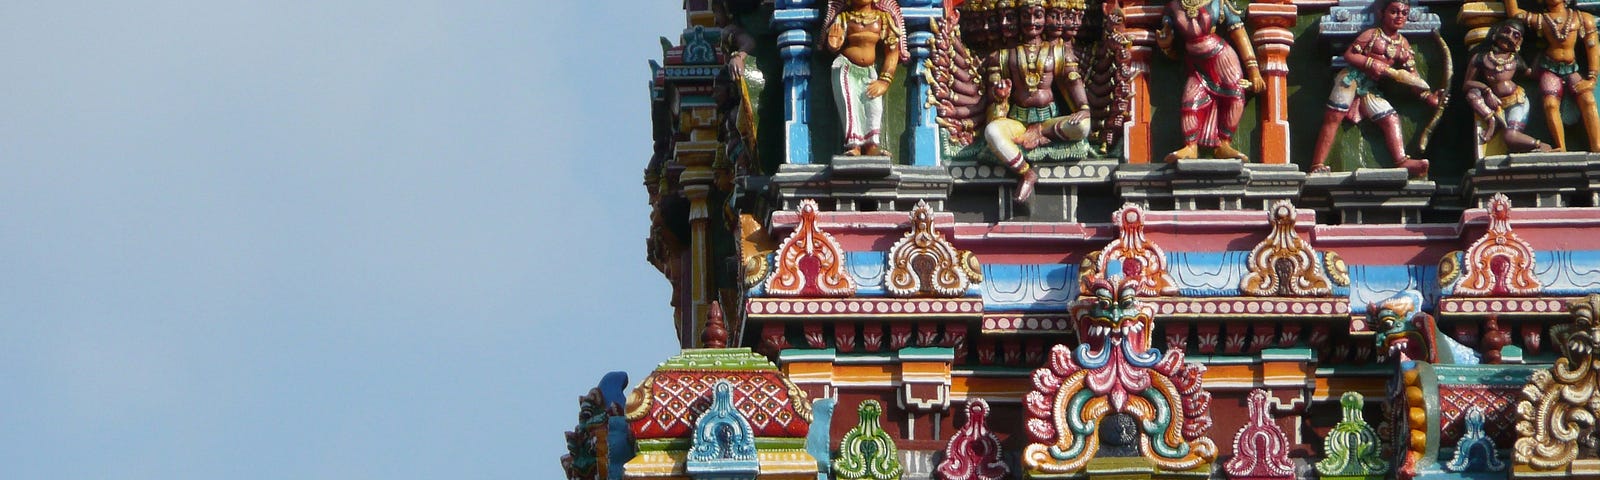 Picture of an entrance tower in a Hindu temple sporting sculptures of deities and mythical beings